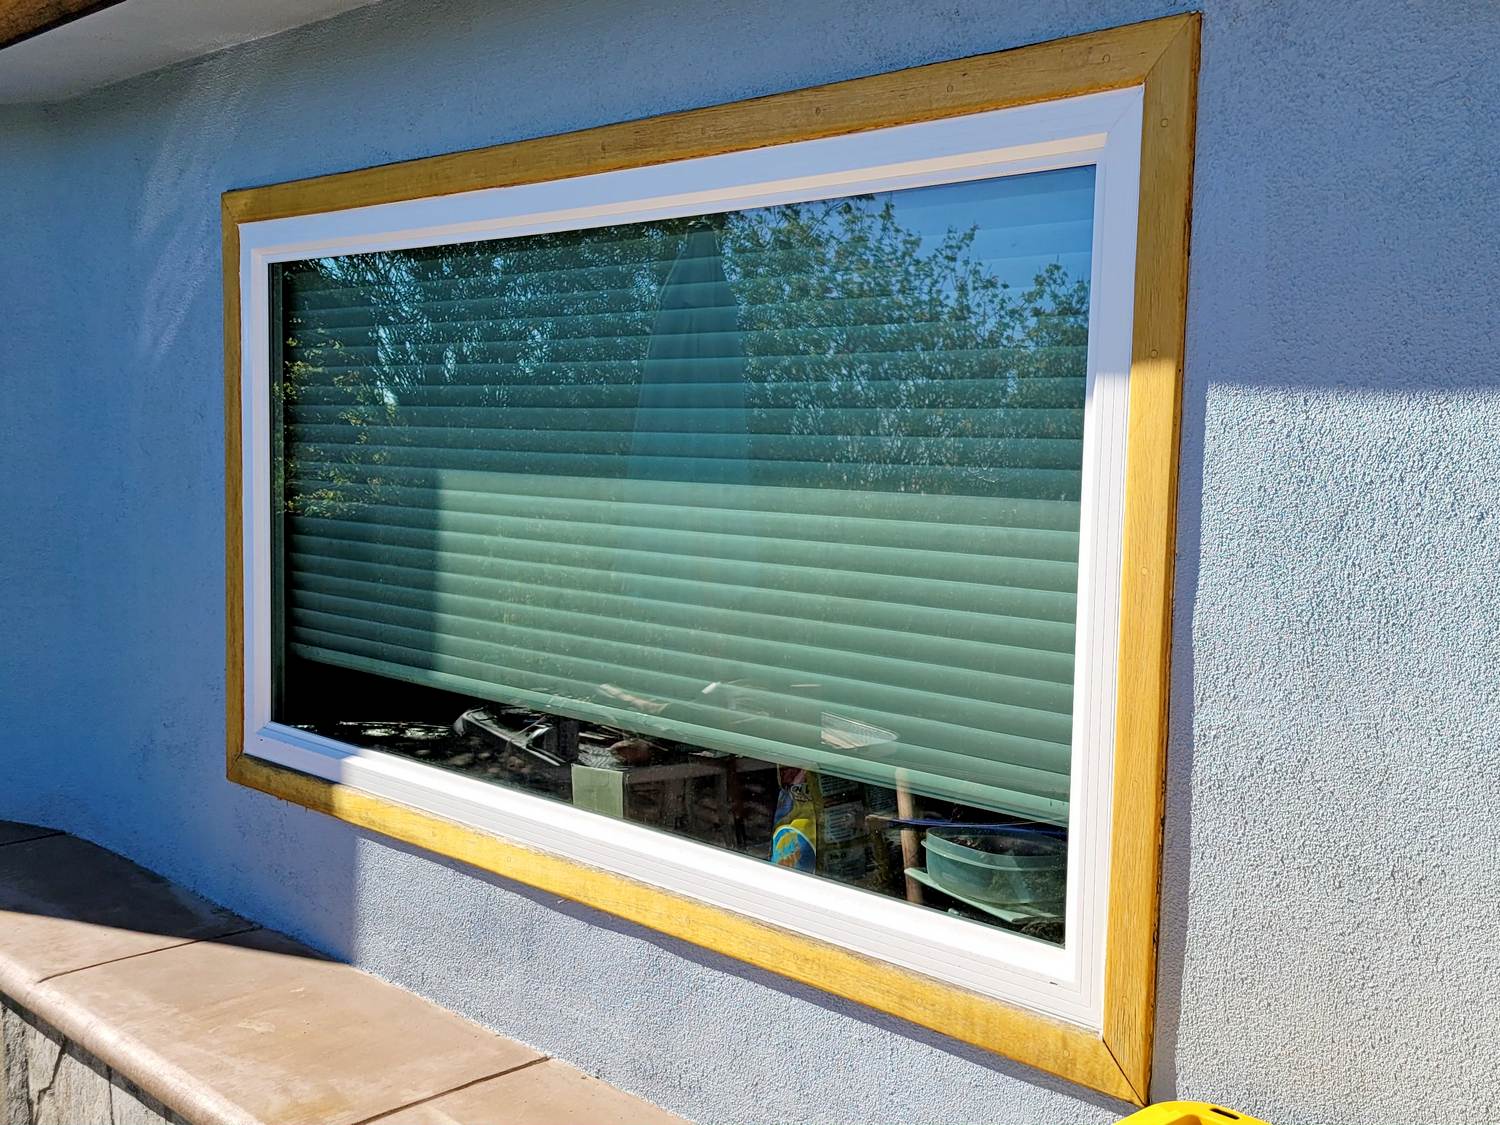 Window and Patio Replacement in Palos Verdes, CA